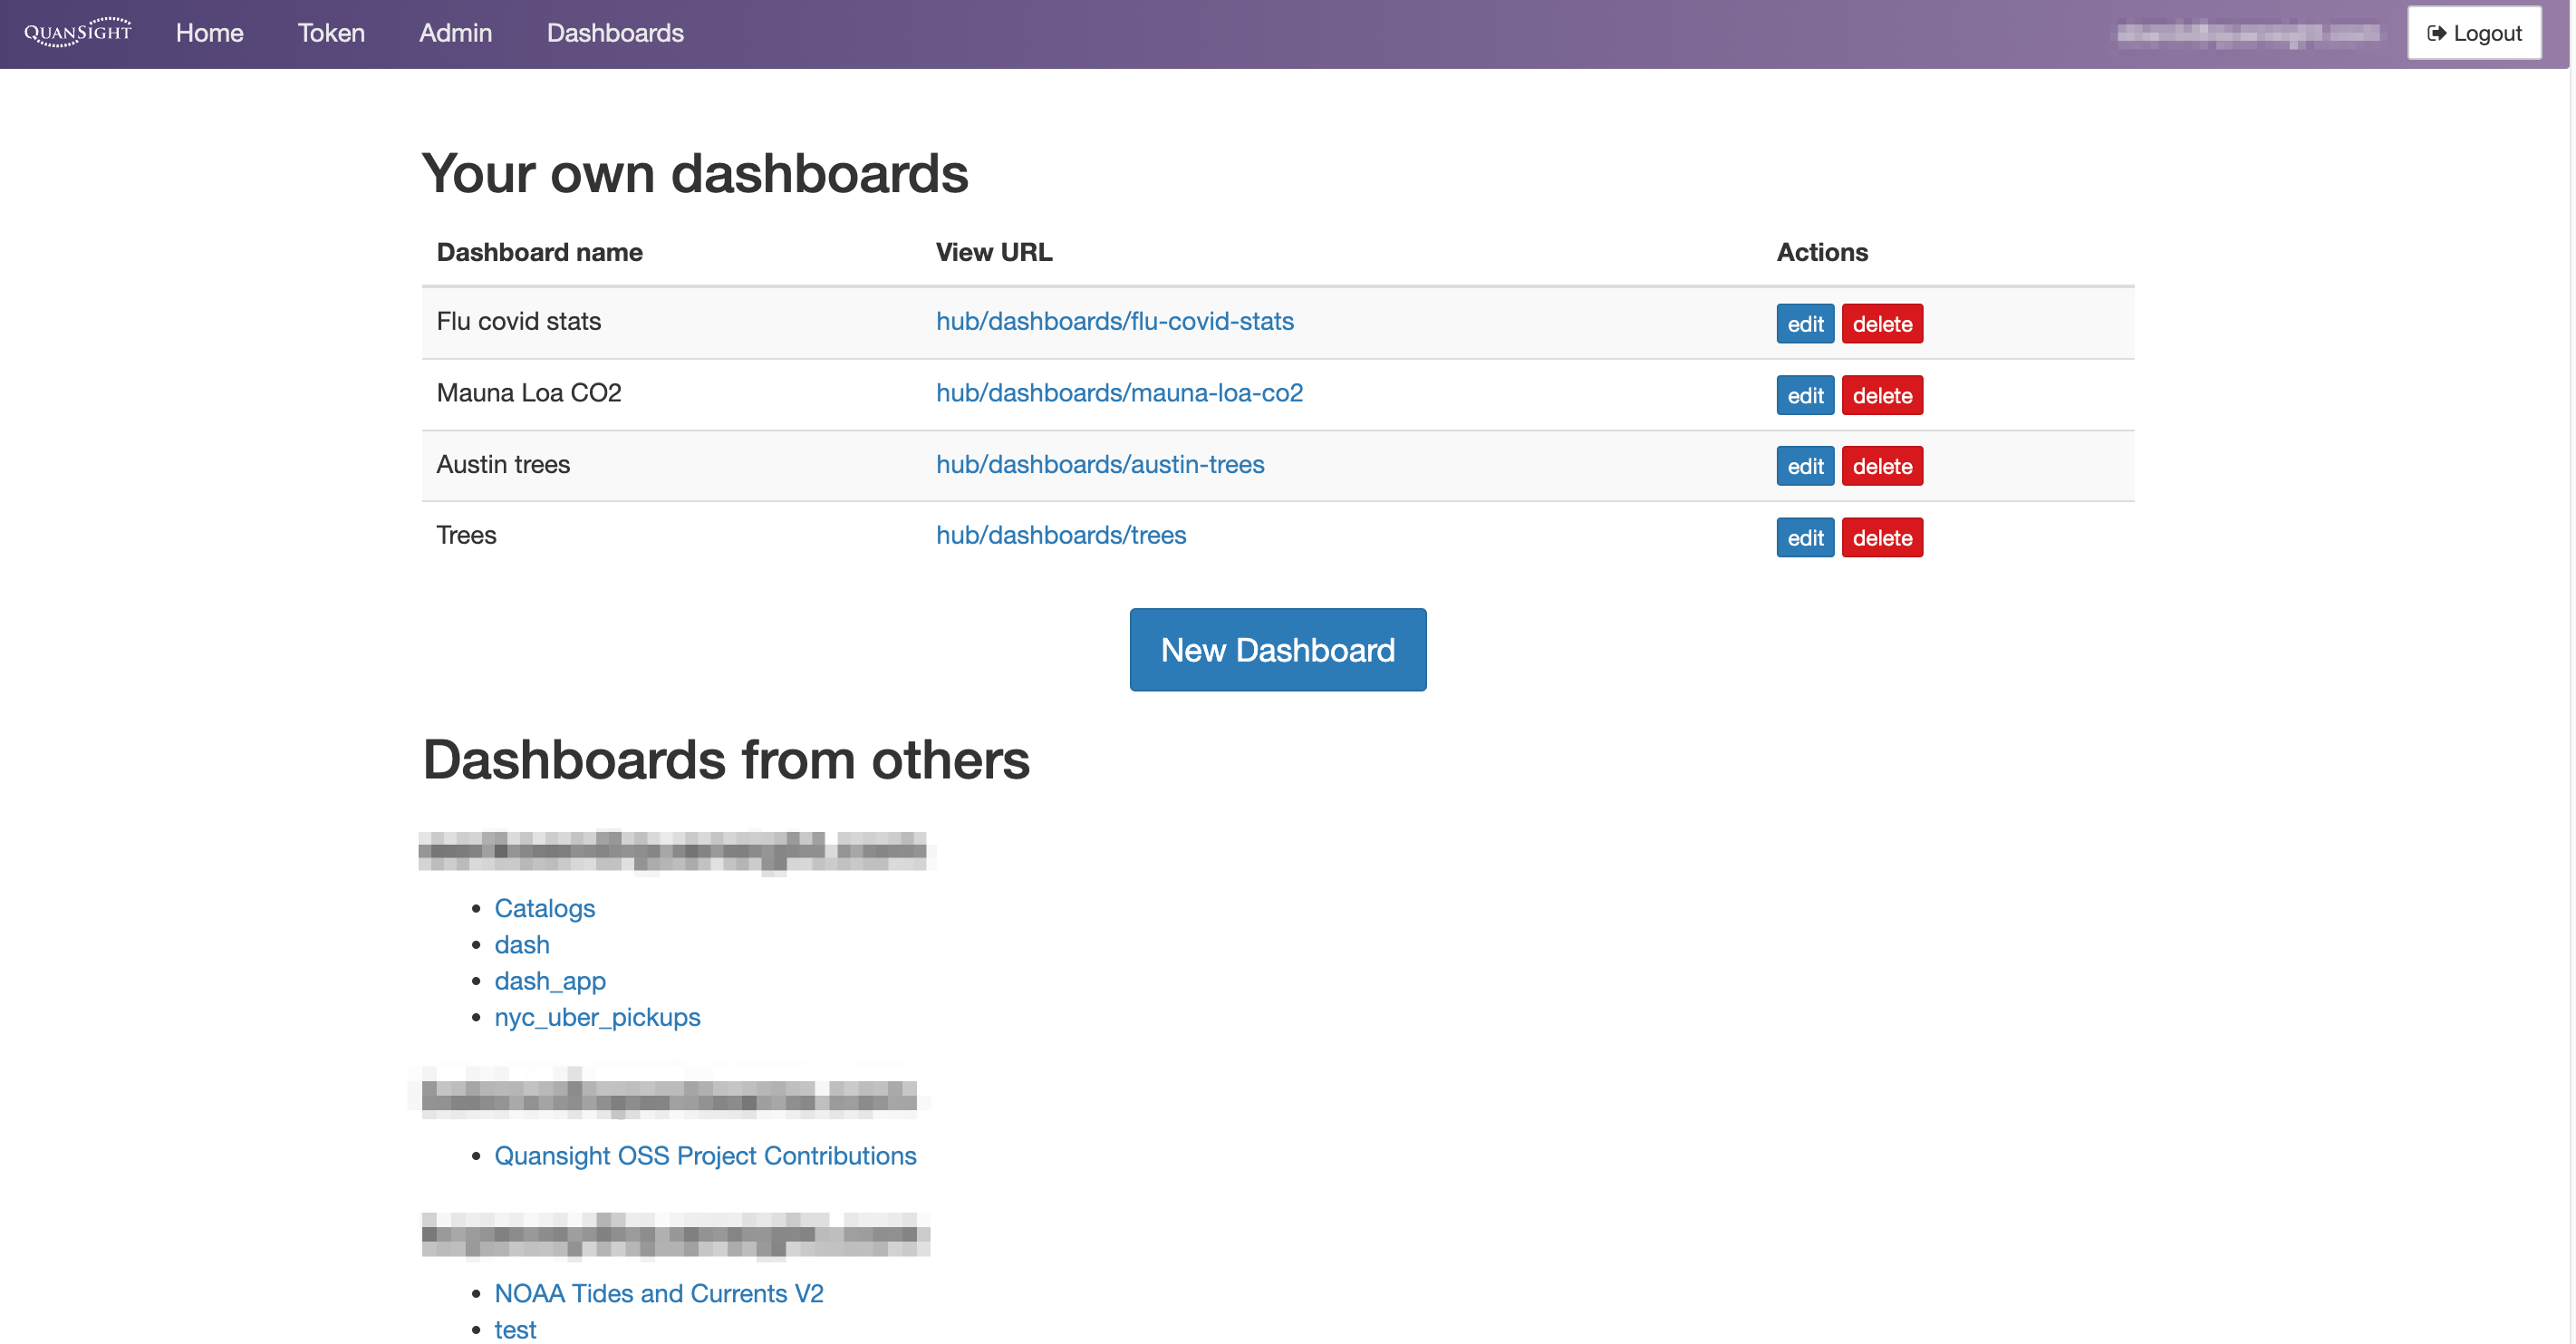 Nebari dashboard panel - showing a number of dashboards with corresponding start/delete buttons, as well as several URLs under the &quot;Dashboards from others heading&quot;